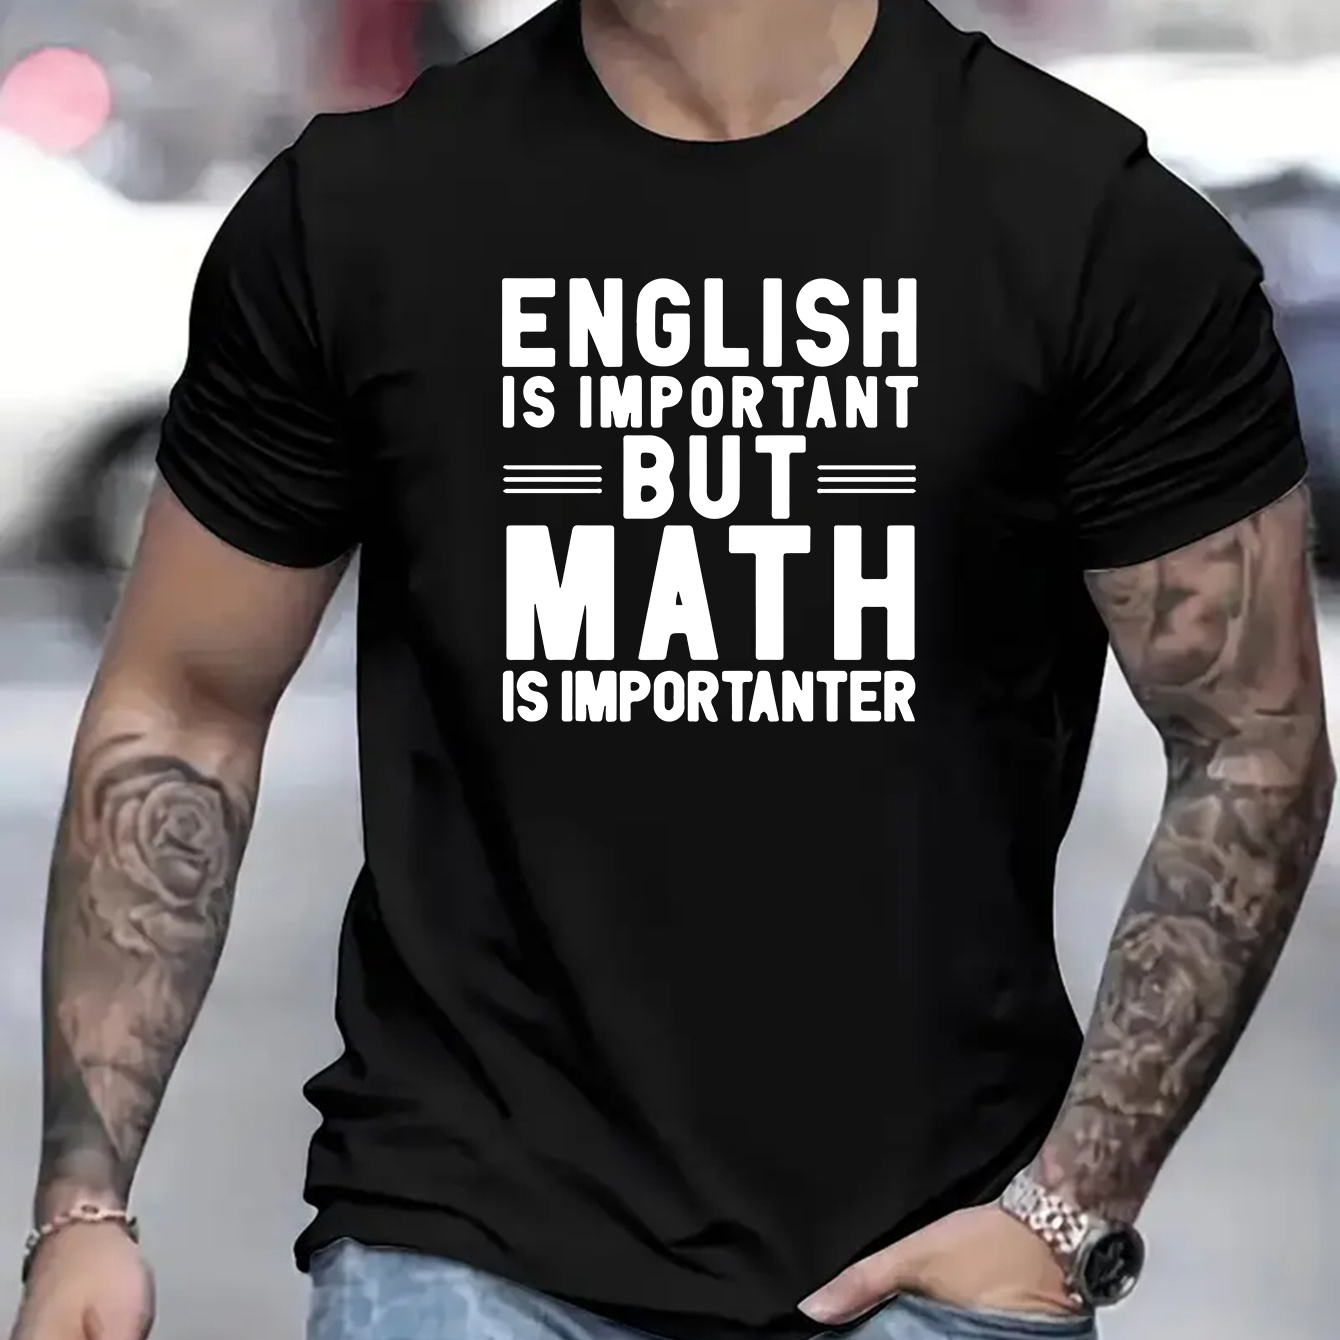 

Math Is Importanter Print T Shirt, Tees For Men, Casual Short Sleeve T-shirt For Summer